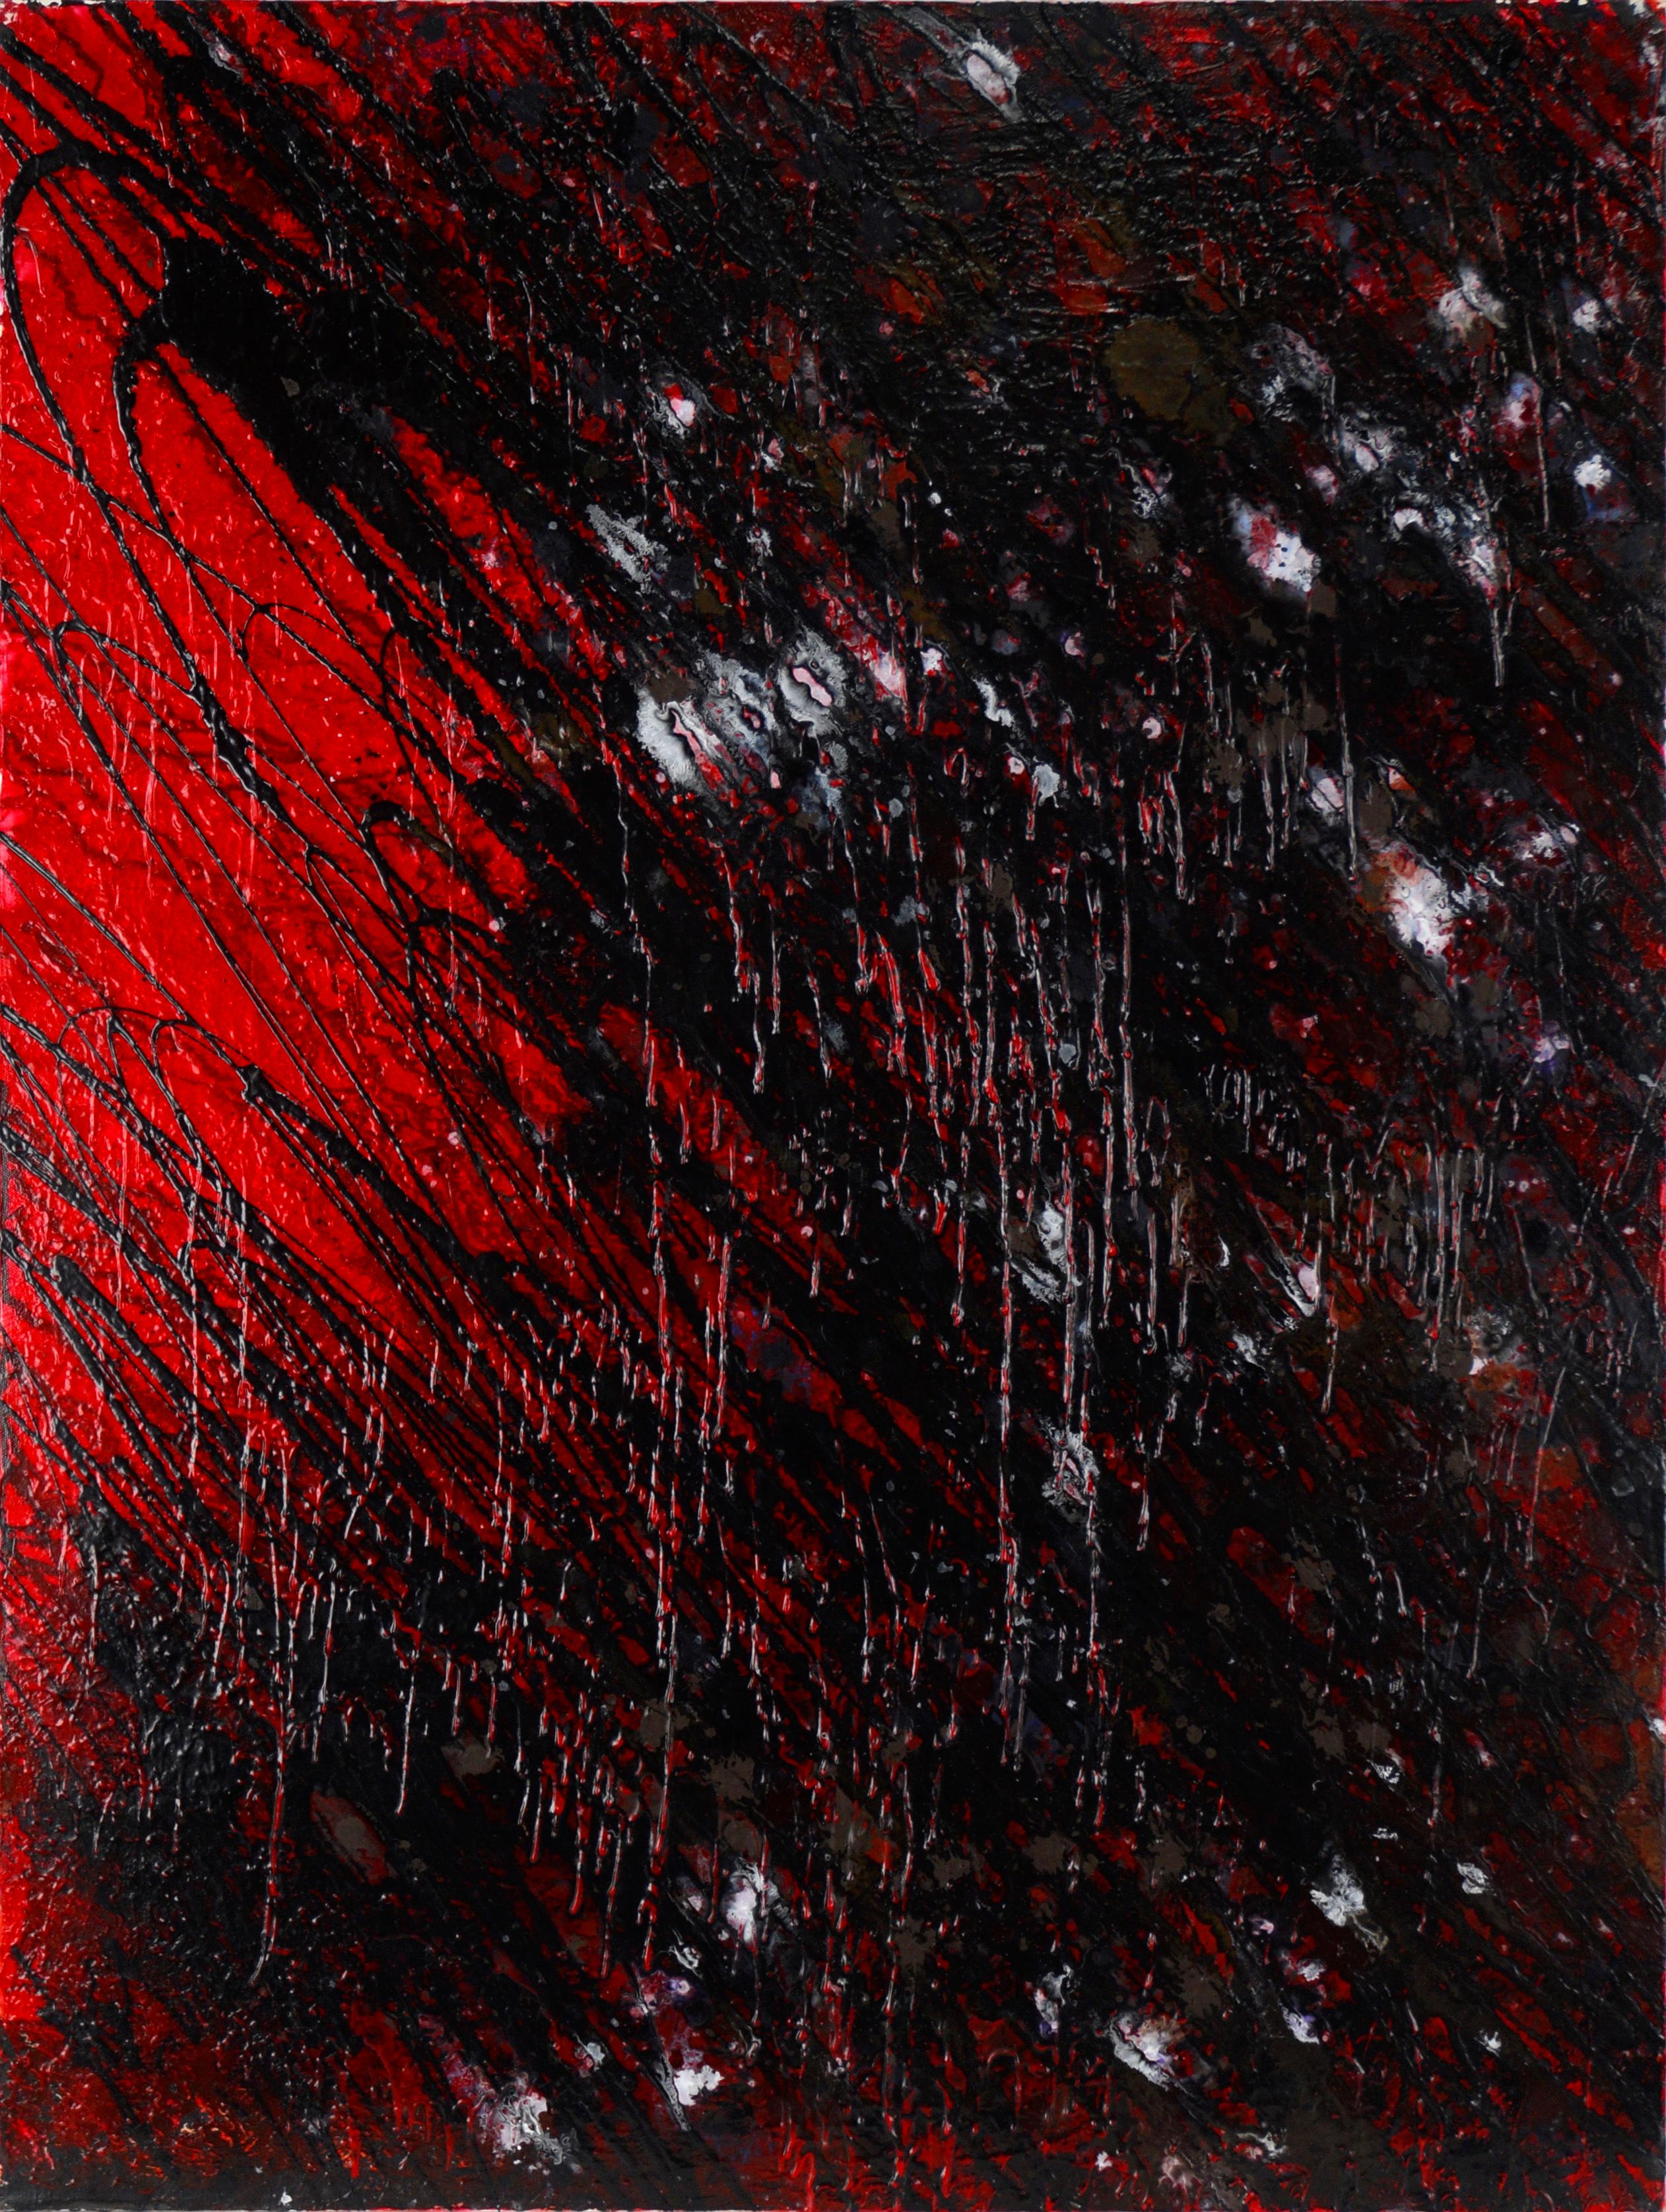 Red and Black Abstract Expressionist Composition in Acrylic on Canvas